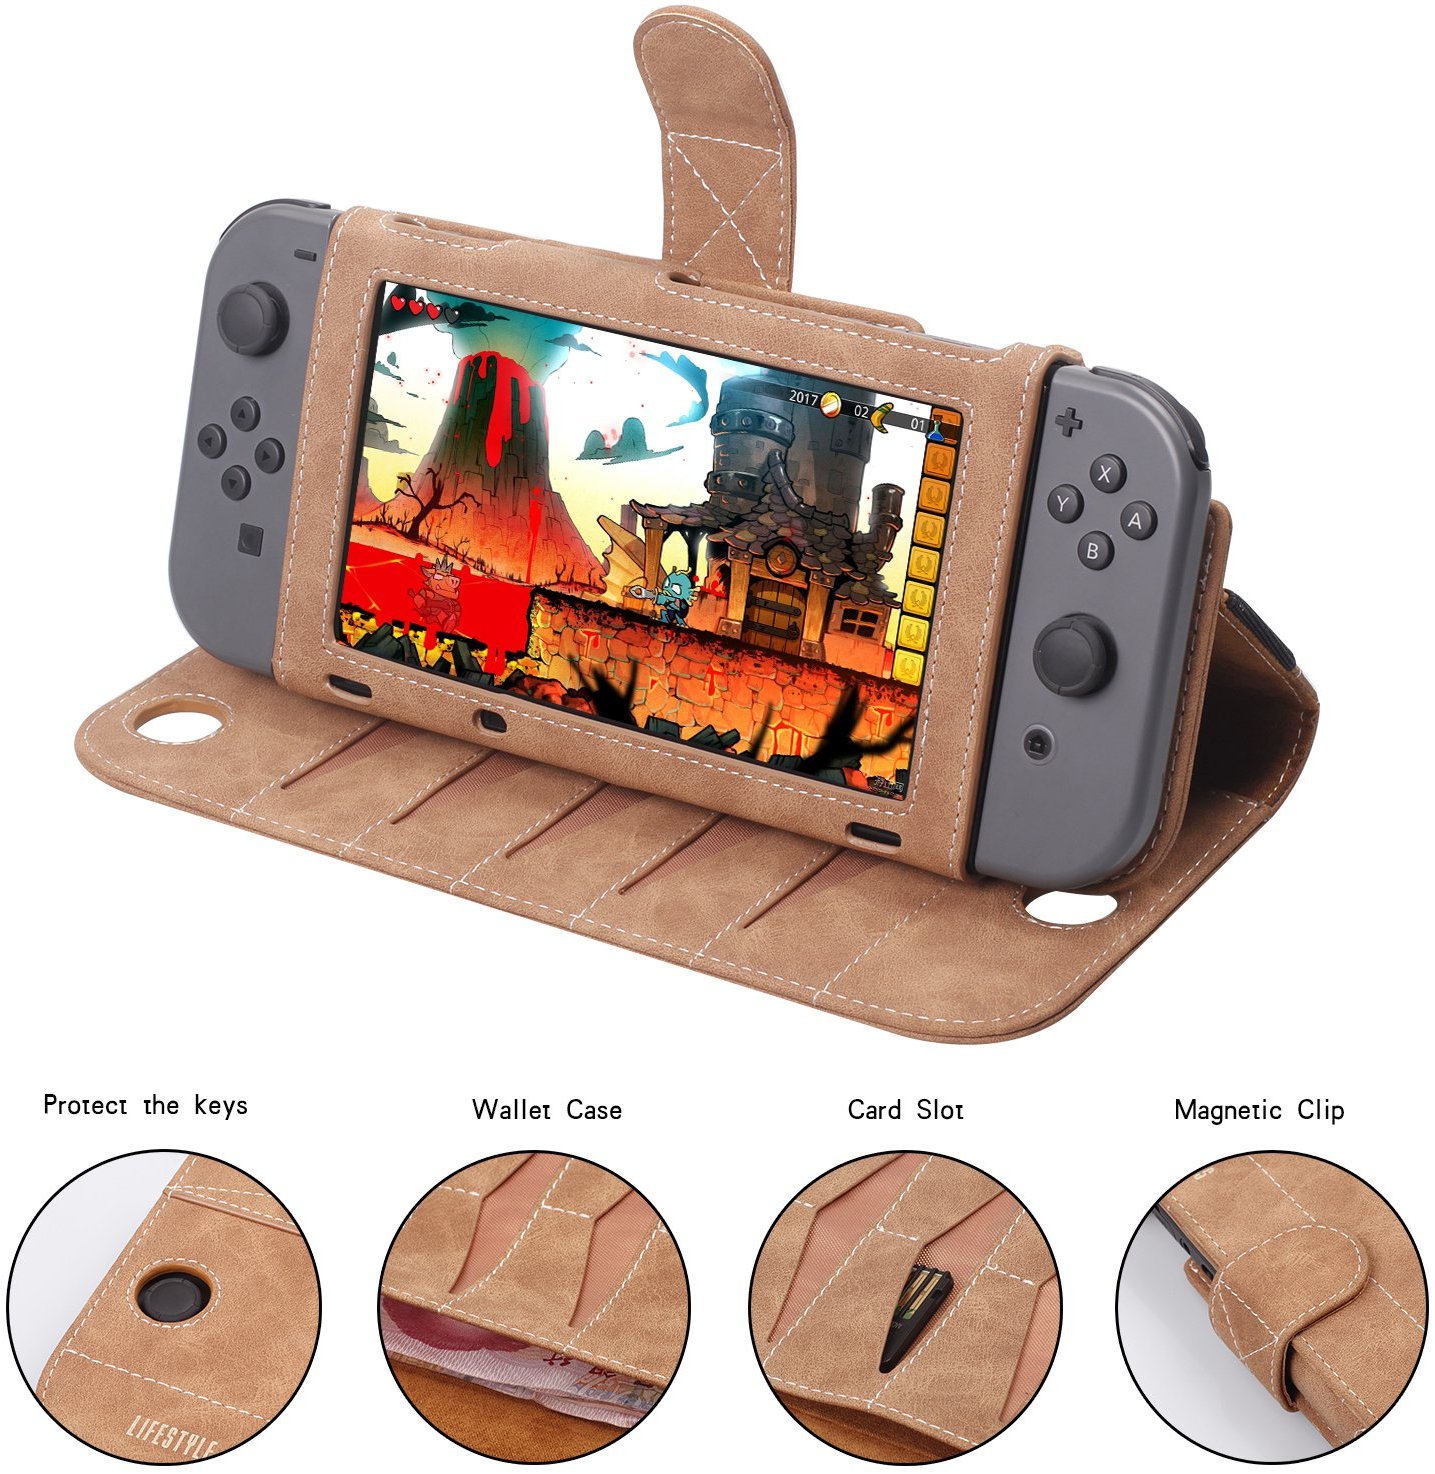 Brig Cornwall Inspiration This Nintendo Switch Flip Leather Case Doubles As A Wallet – NintendoSoup